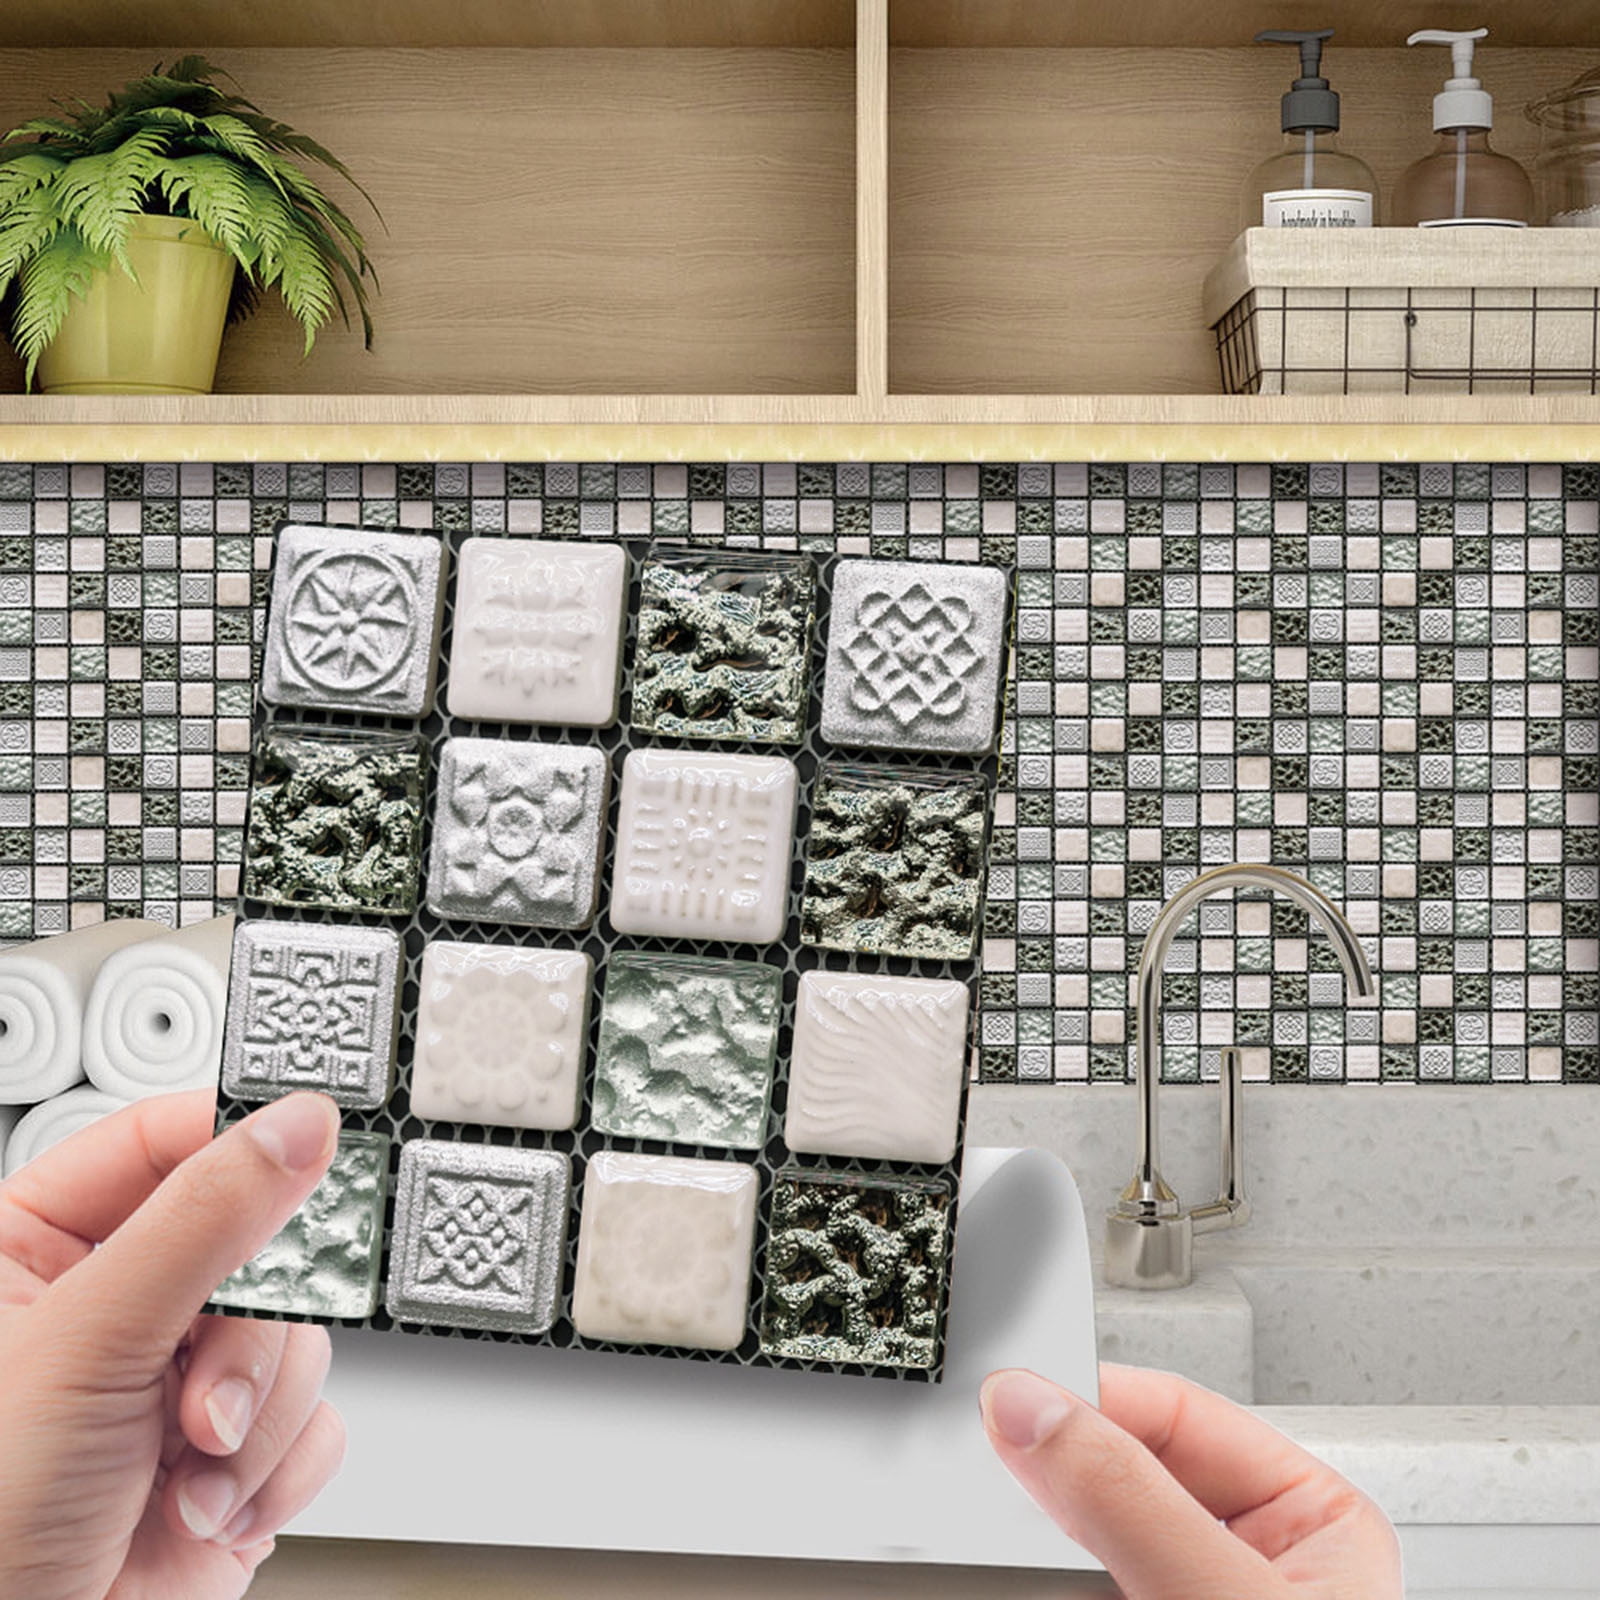 3D Self Adhesive Square Tile Wall Sticker Mosaic Decal Home Floor Kitchen Decor